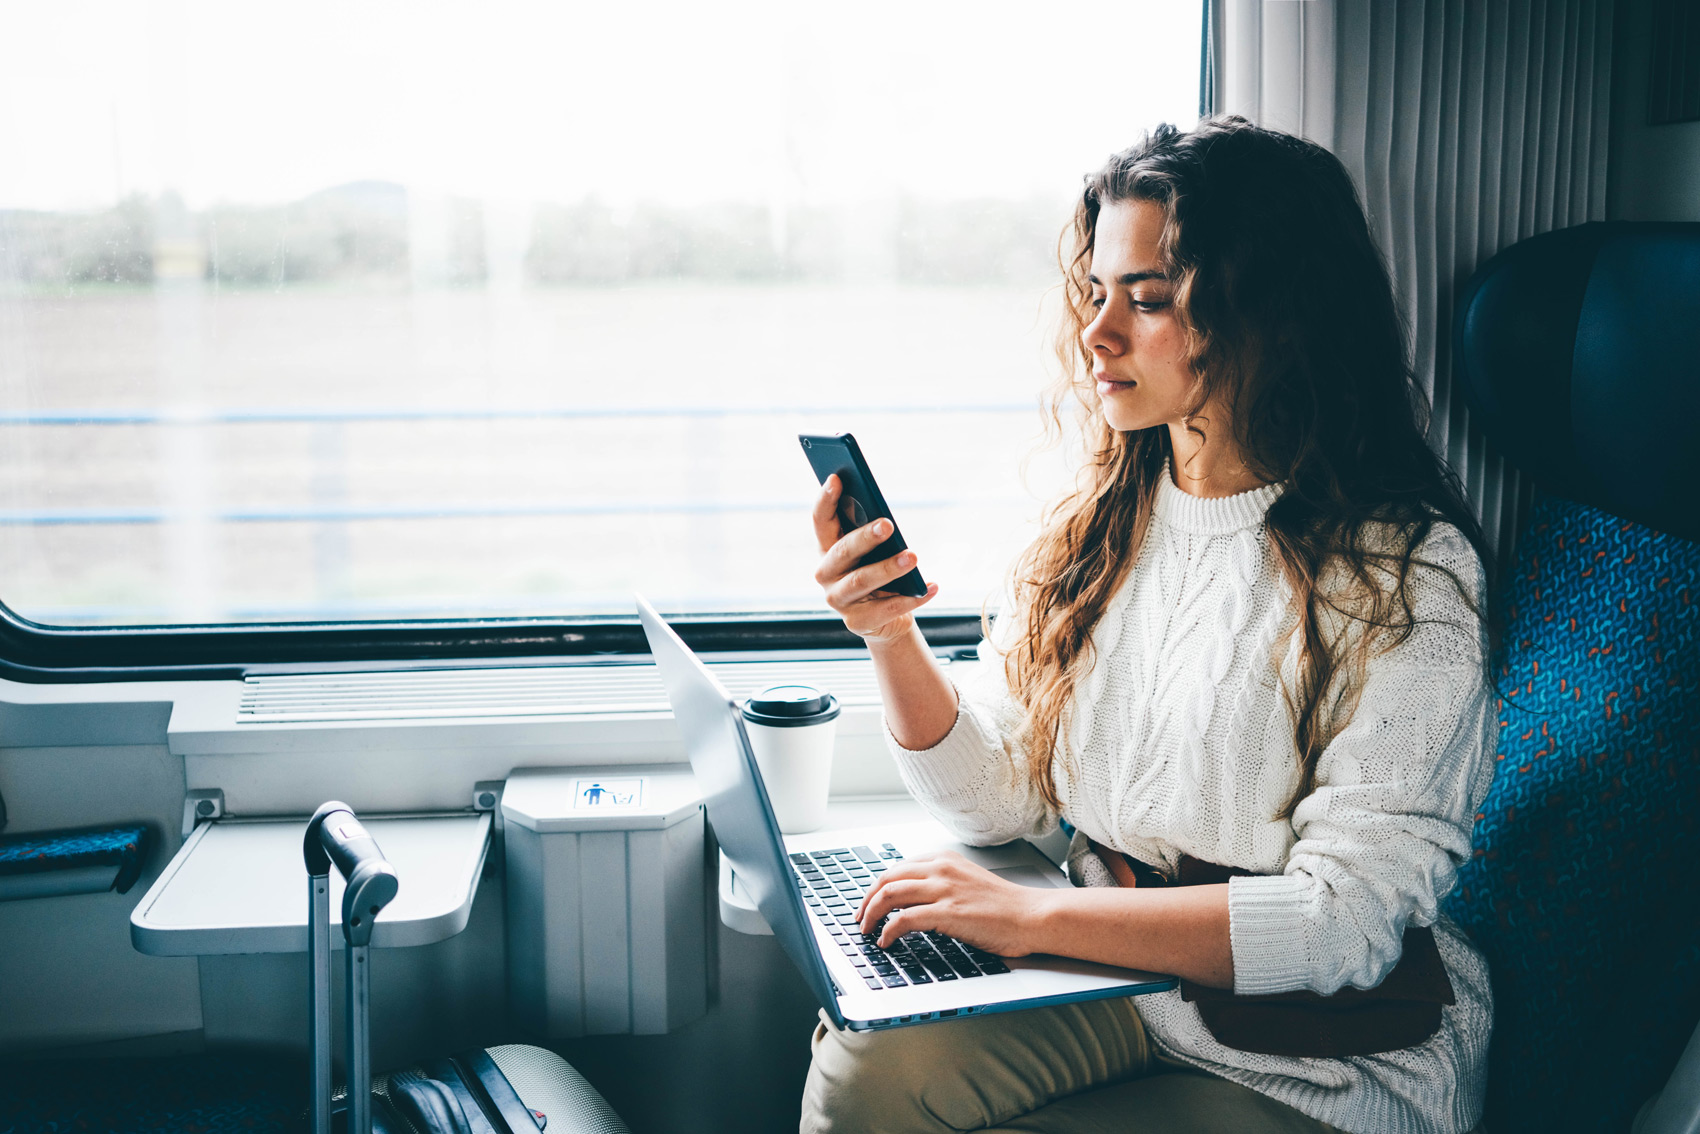 Travel Services Every Executive Needs - Woman Business Leader in Virtual Meeting on Train